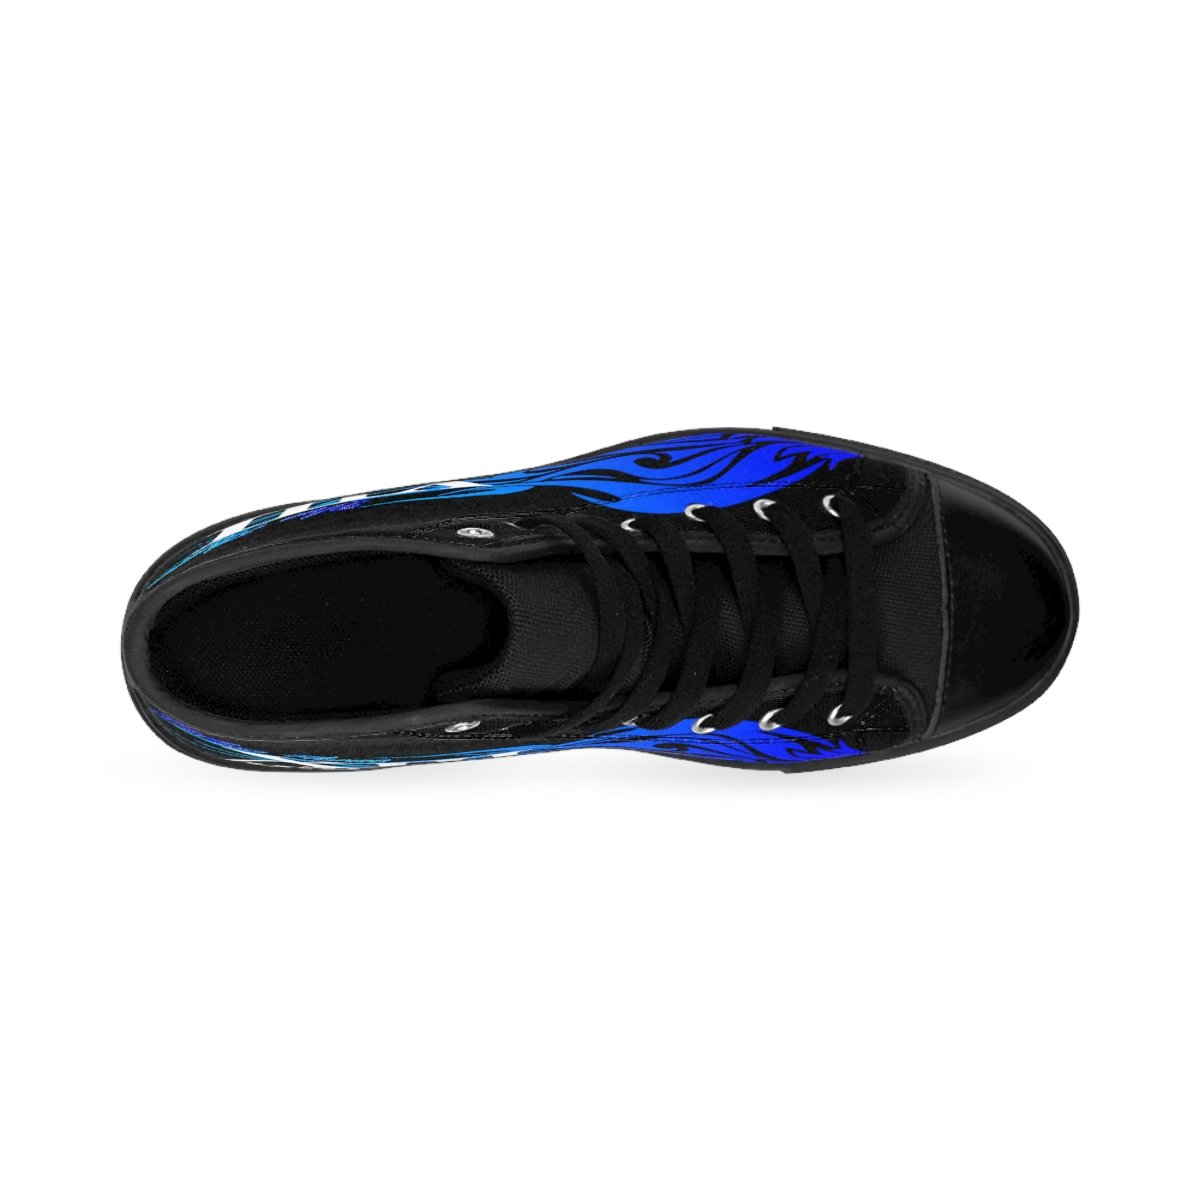 XIII Minutes Blue Flame Men’s High-top Sneakers